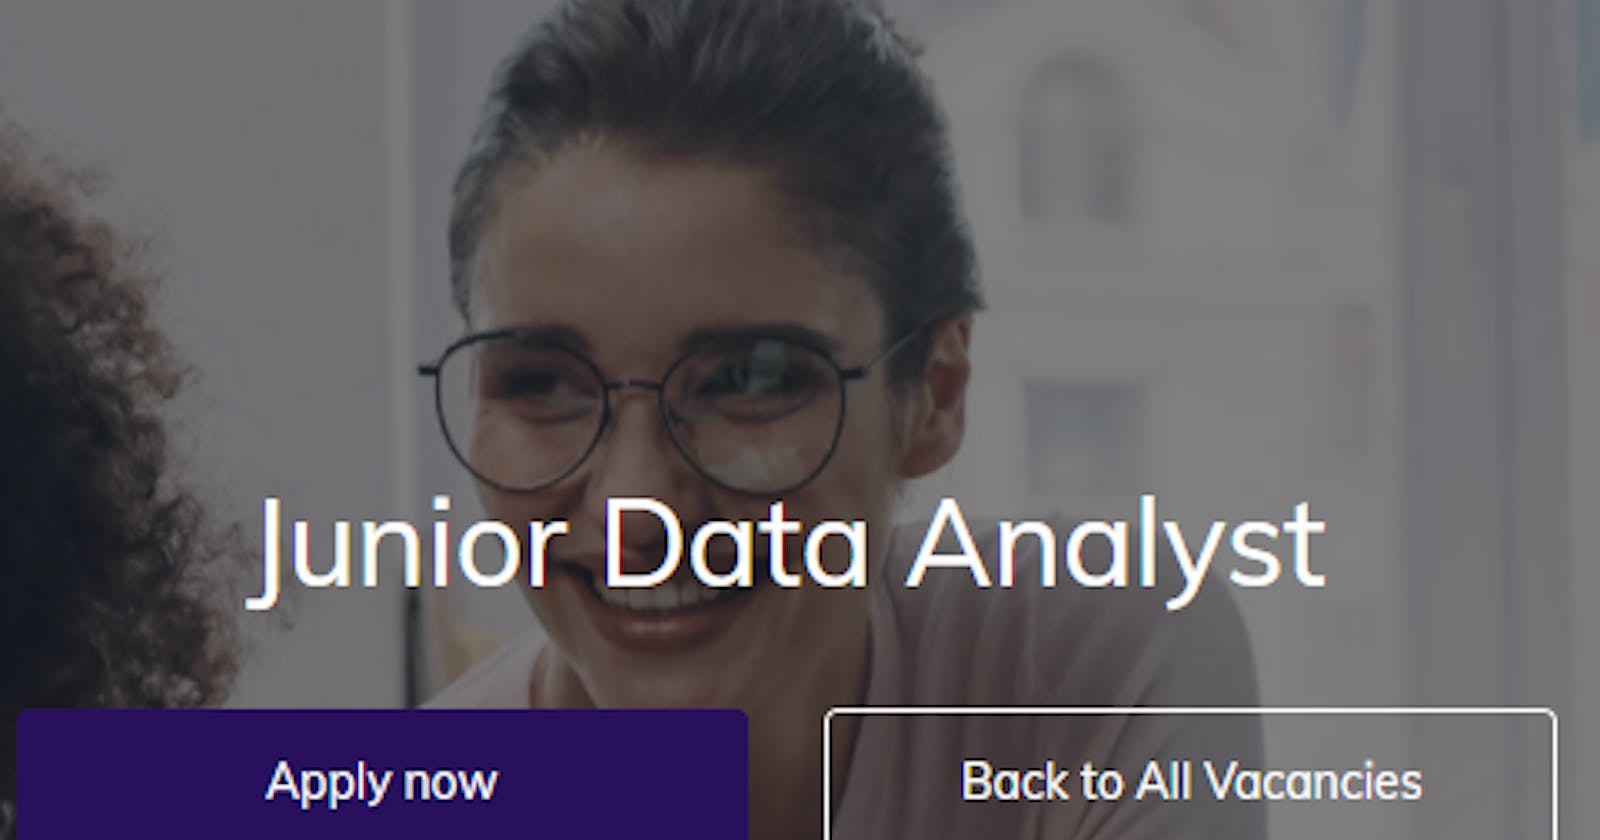 Starting as a Junior Data Analyst... at 40?